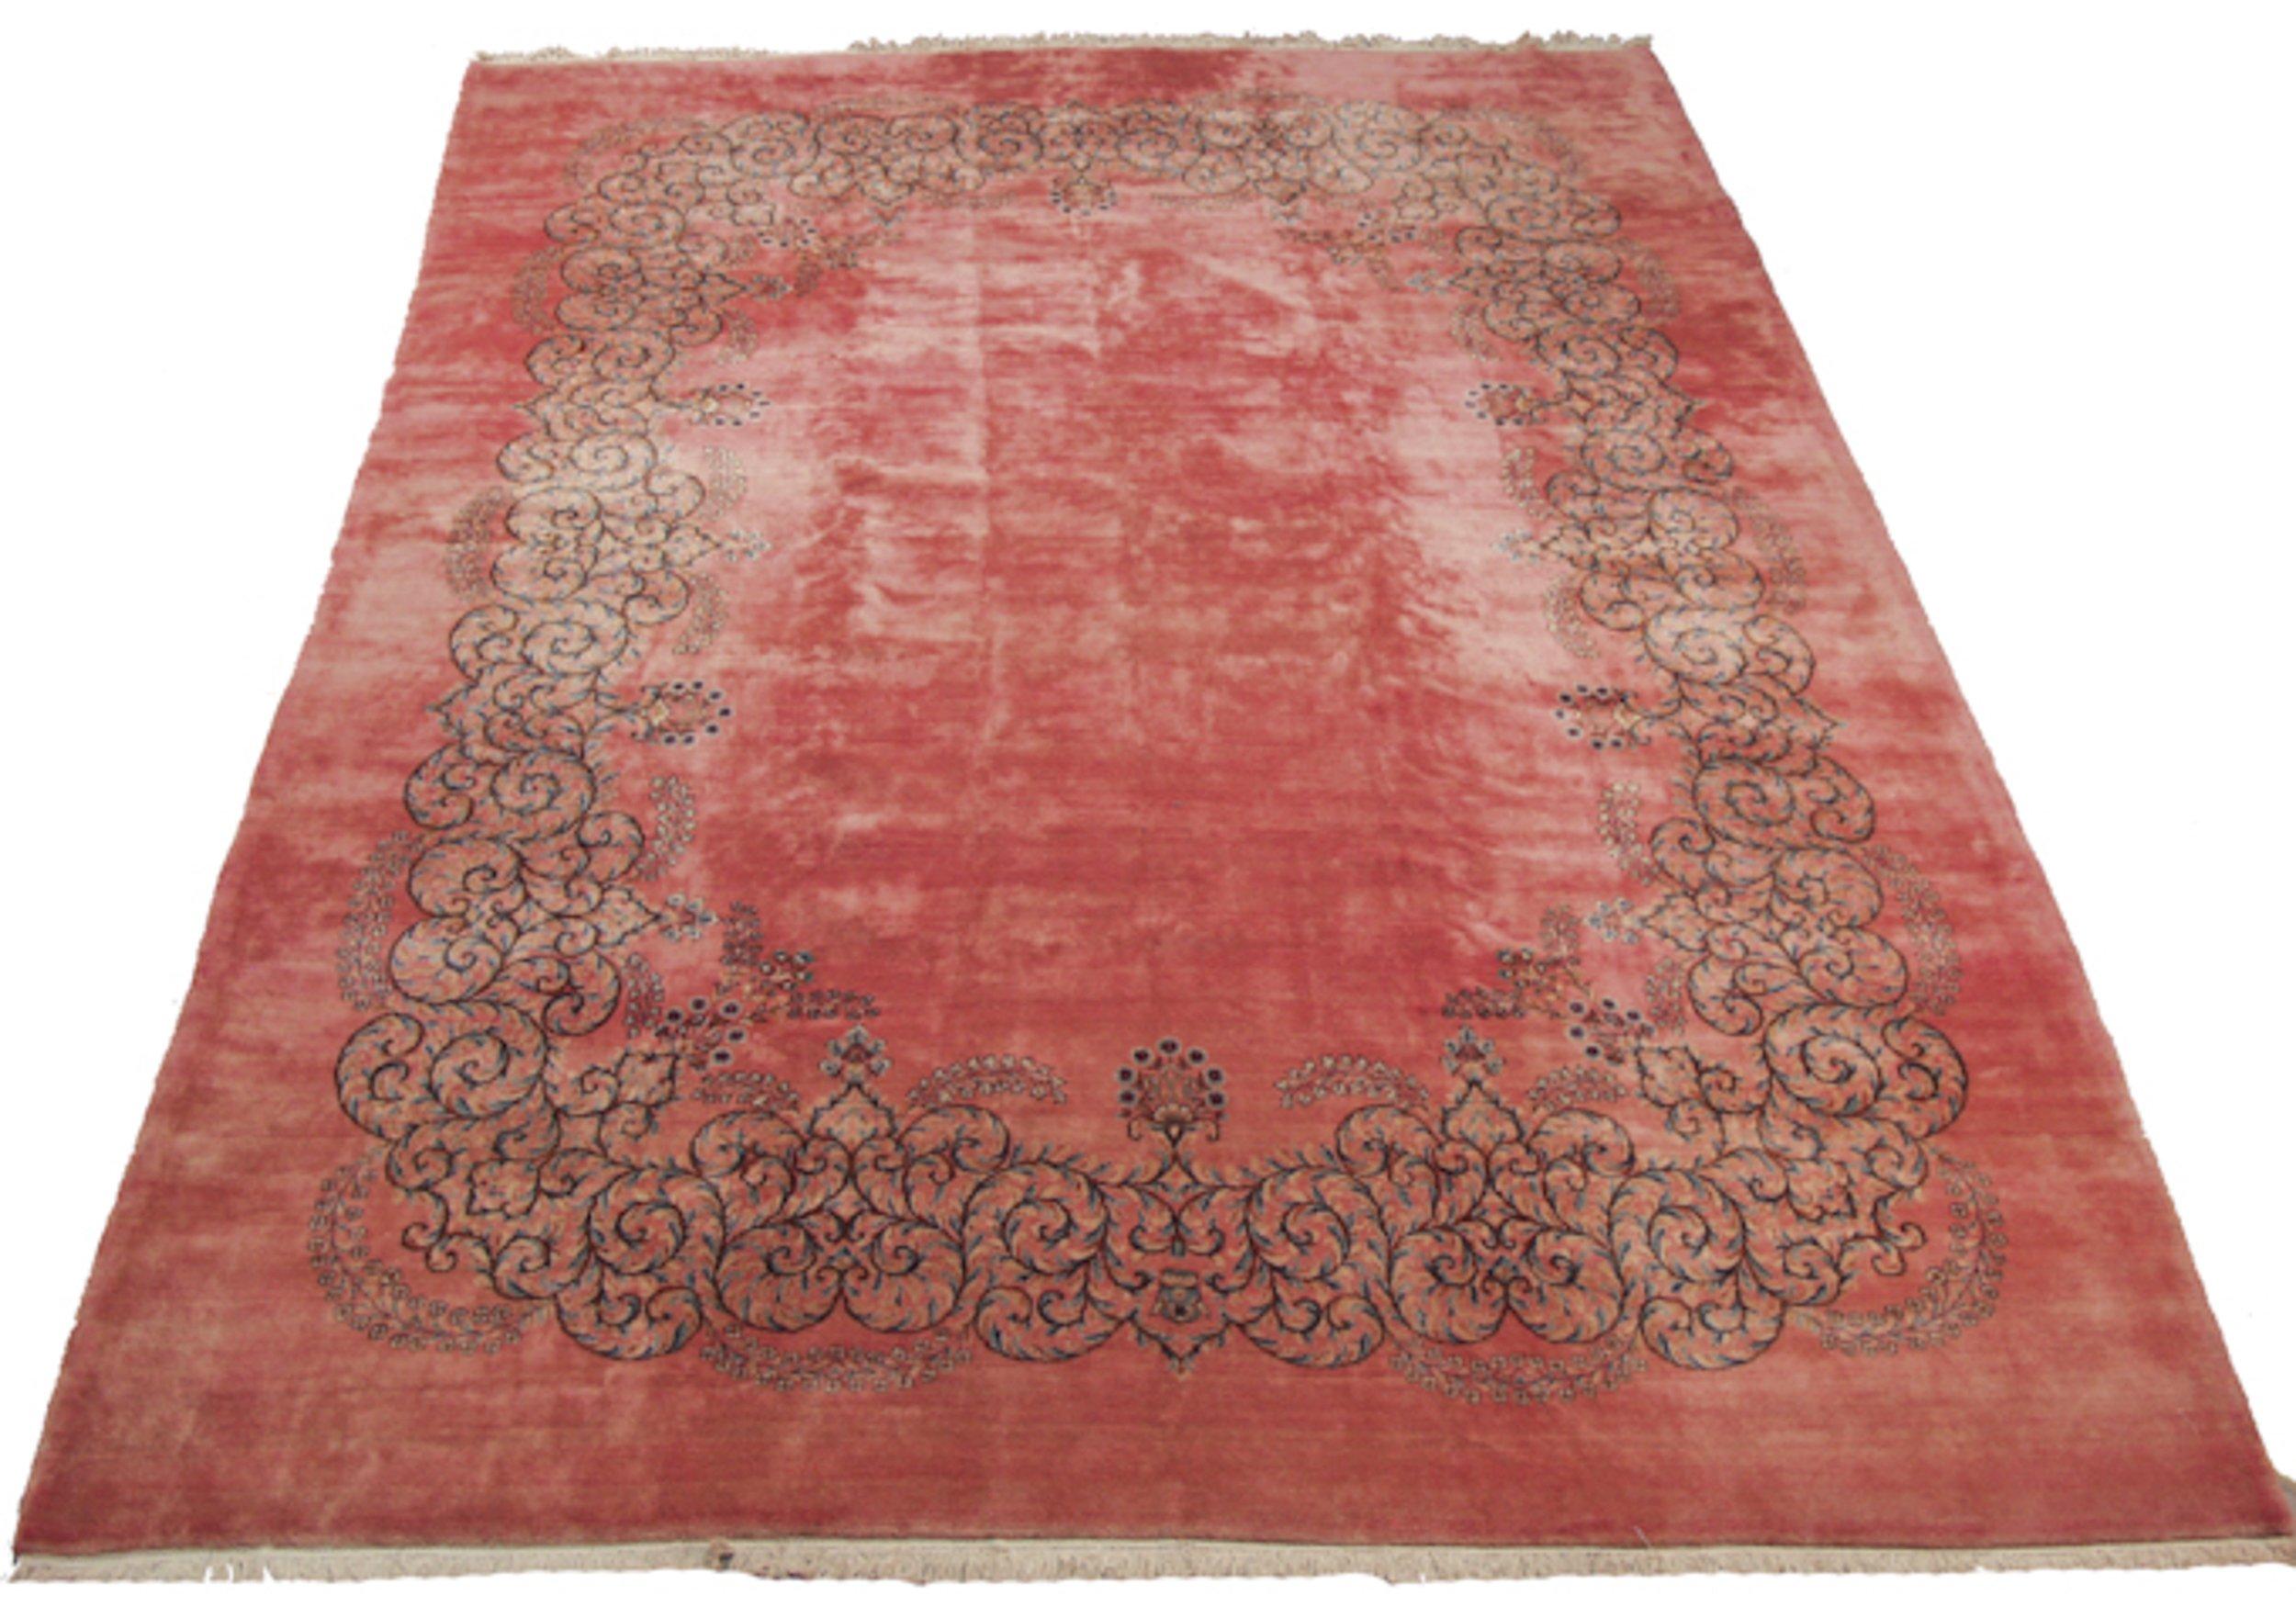 Highly unusual open field with floating oversized scrolling vine main border with European Rococo motif and detailed elongated blossomed stems. Colors and shades include: Dusty rose, pink, sky blue, navy blue, cochineal red, and more. Condition